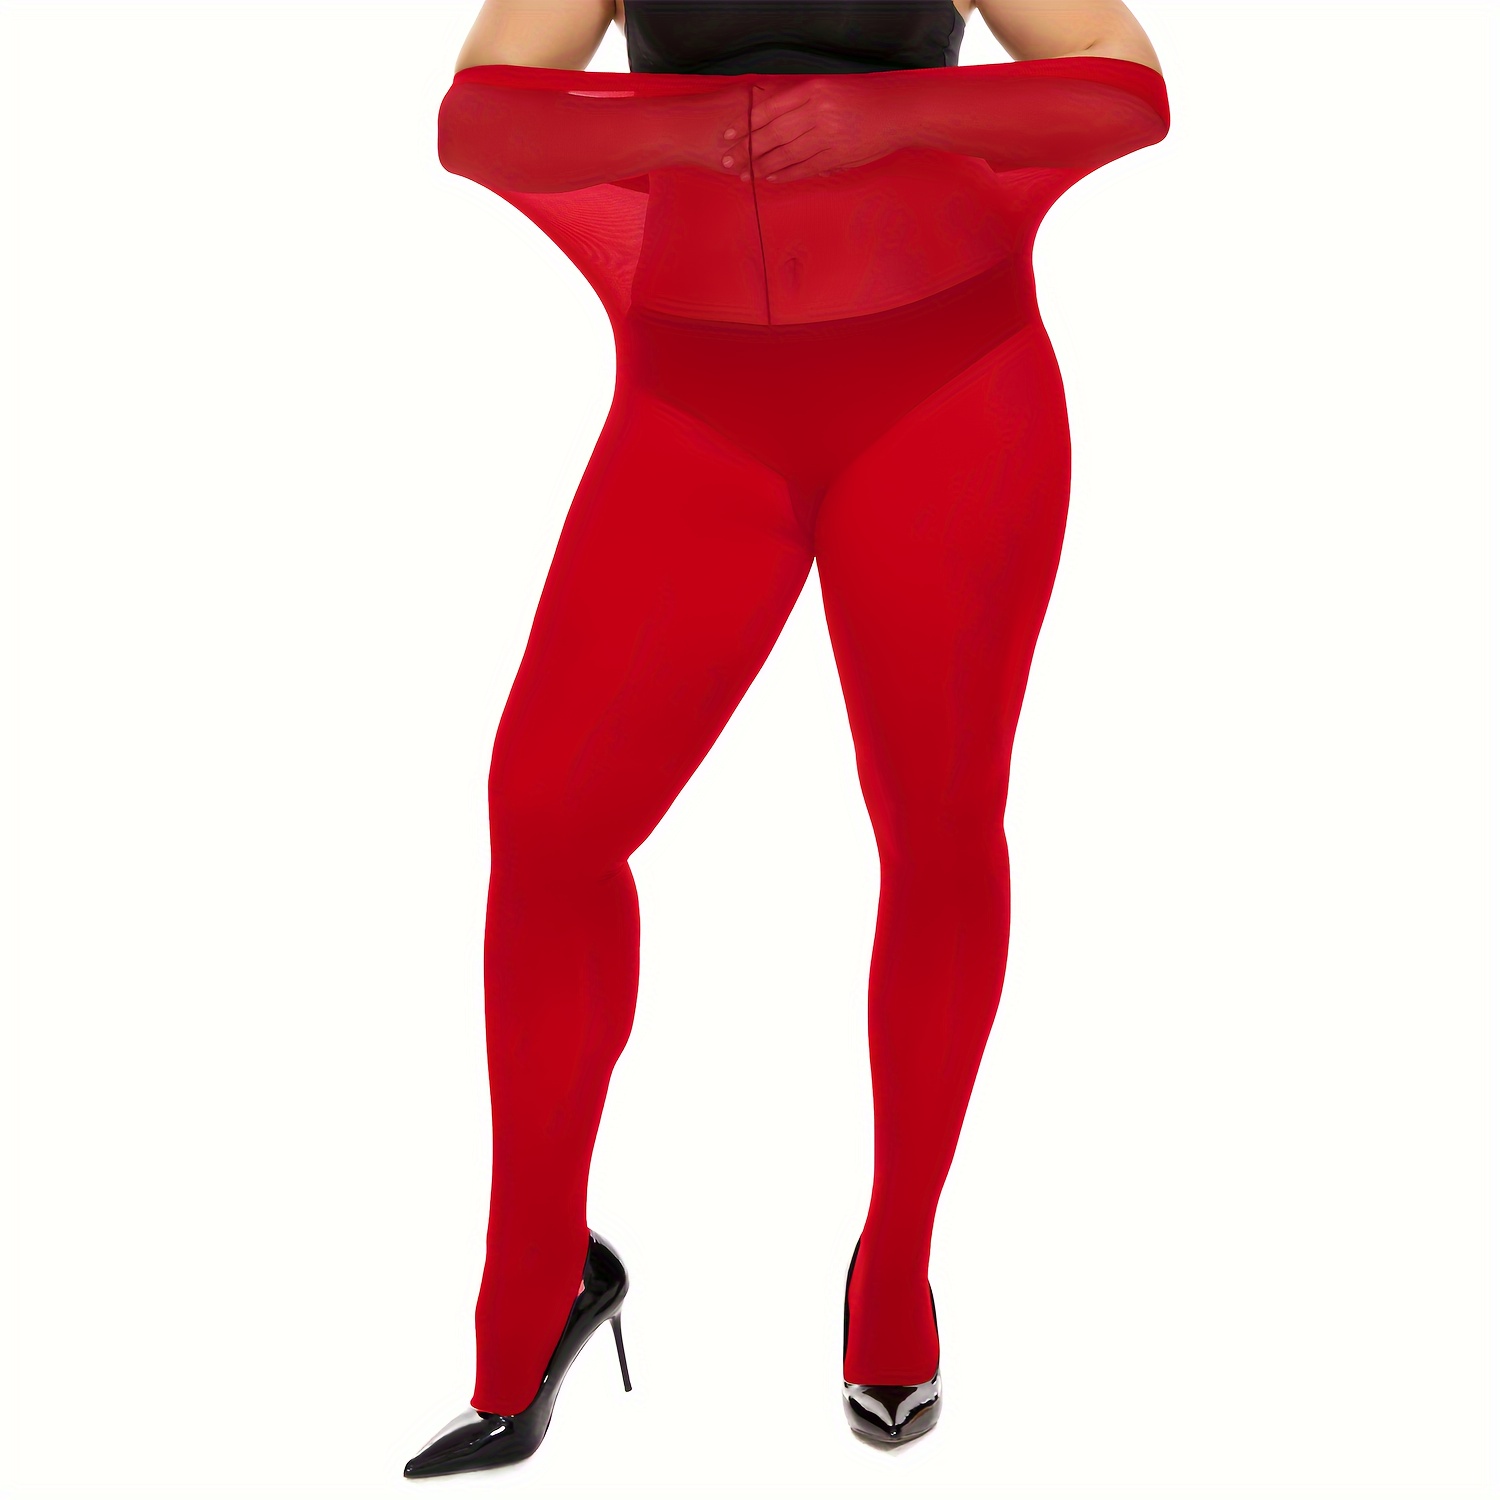  LISSELE Opaque Plus Size Tights for Women - Microfiber